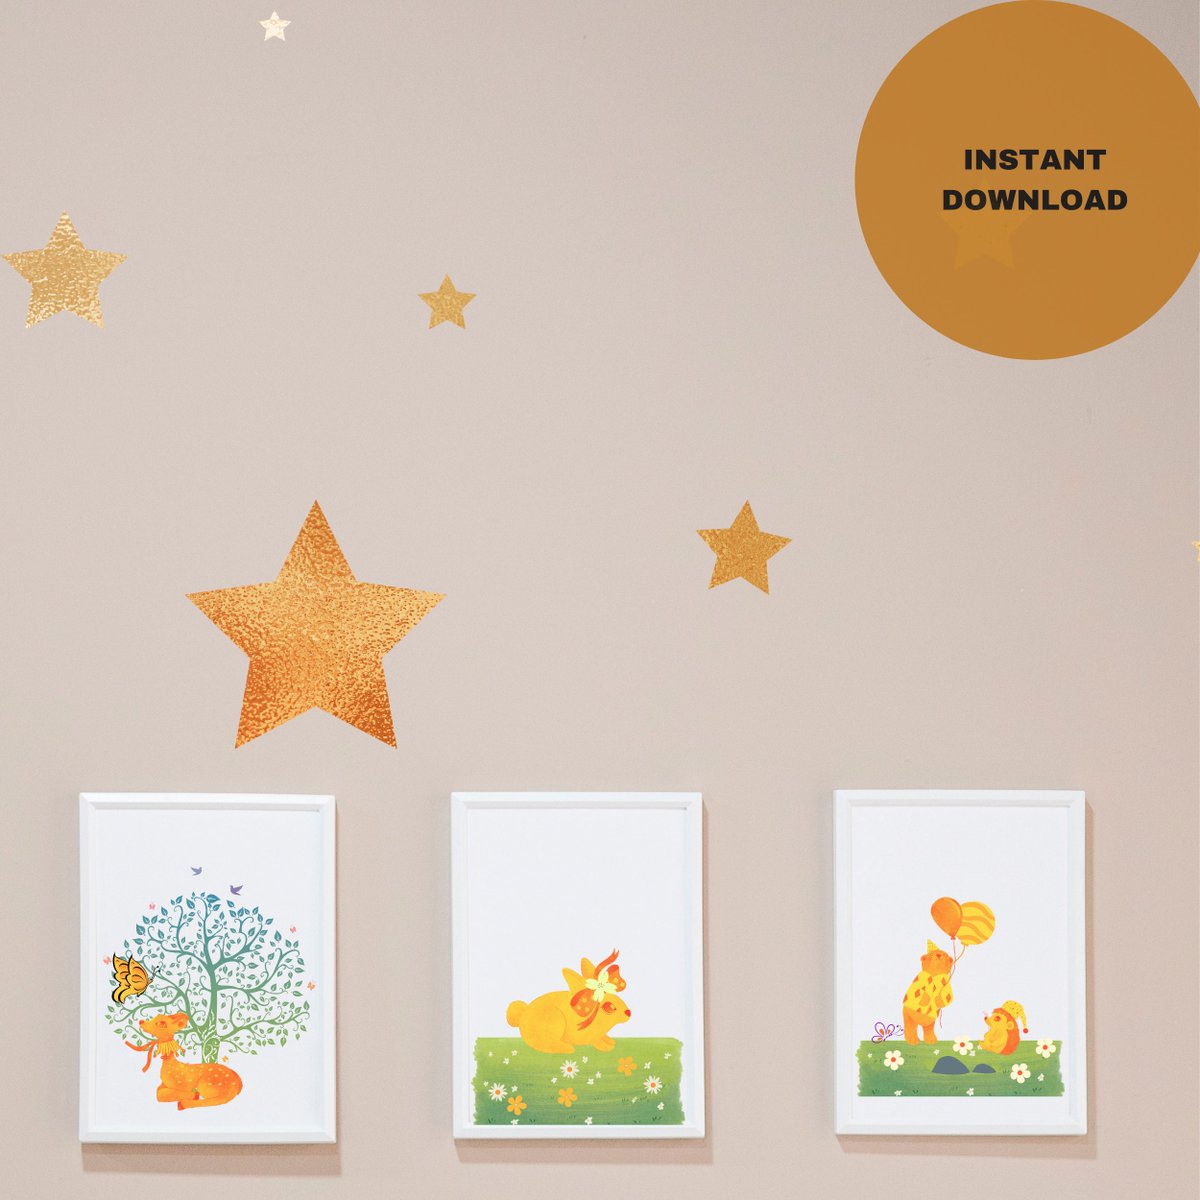 Excited to share the latest addition to my #etsy shop: Woodland animals Wall Art For kids and nursery, Baby ShowerGift, set of 3 etsy.me/41YP2Ps #orange #babyshower #green #unframed #entryway #artdeco #animal #vertical #nurseryprints